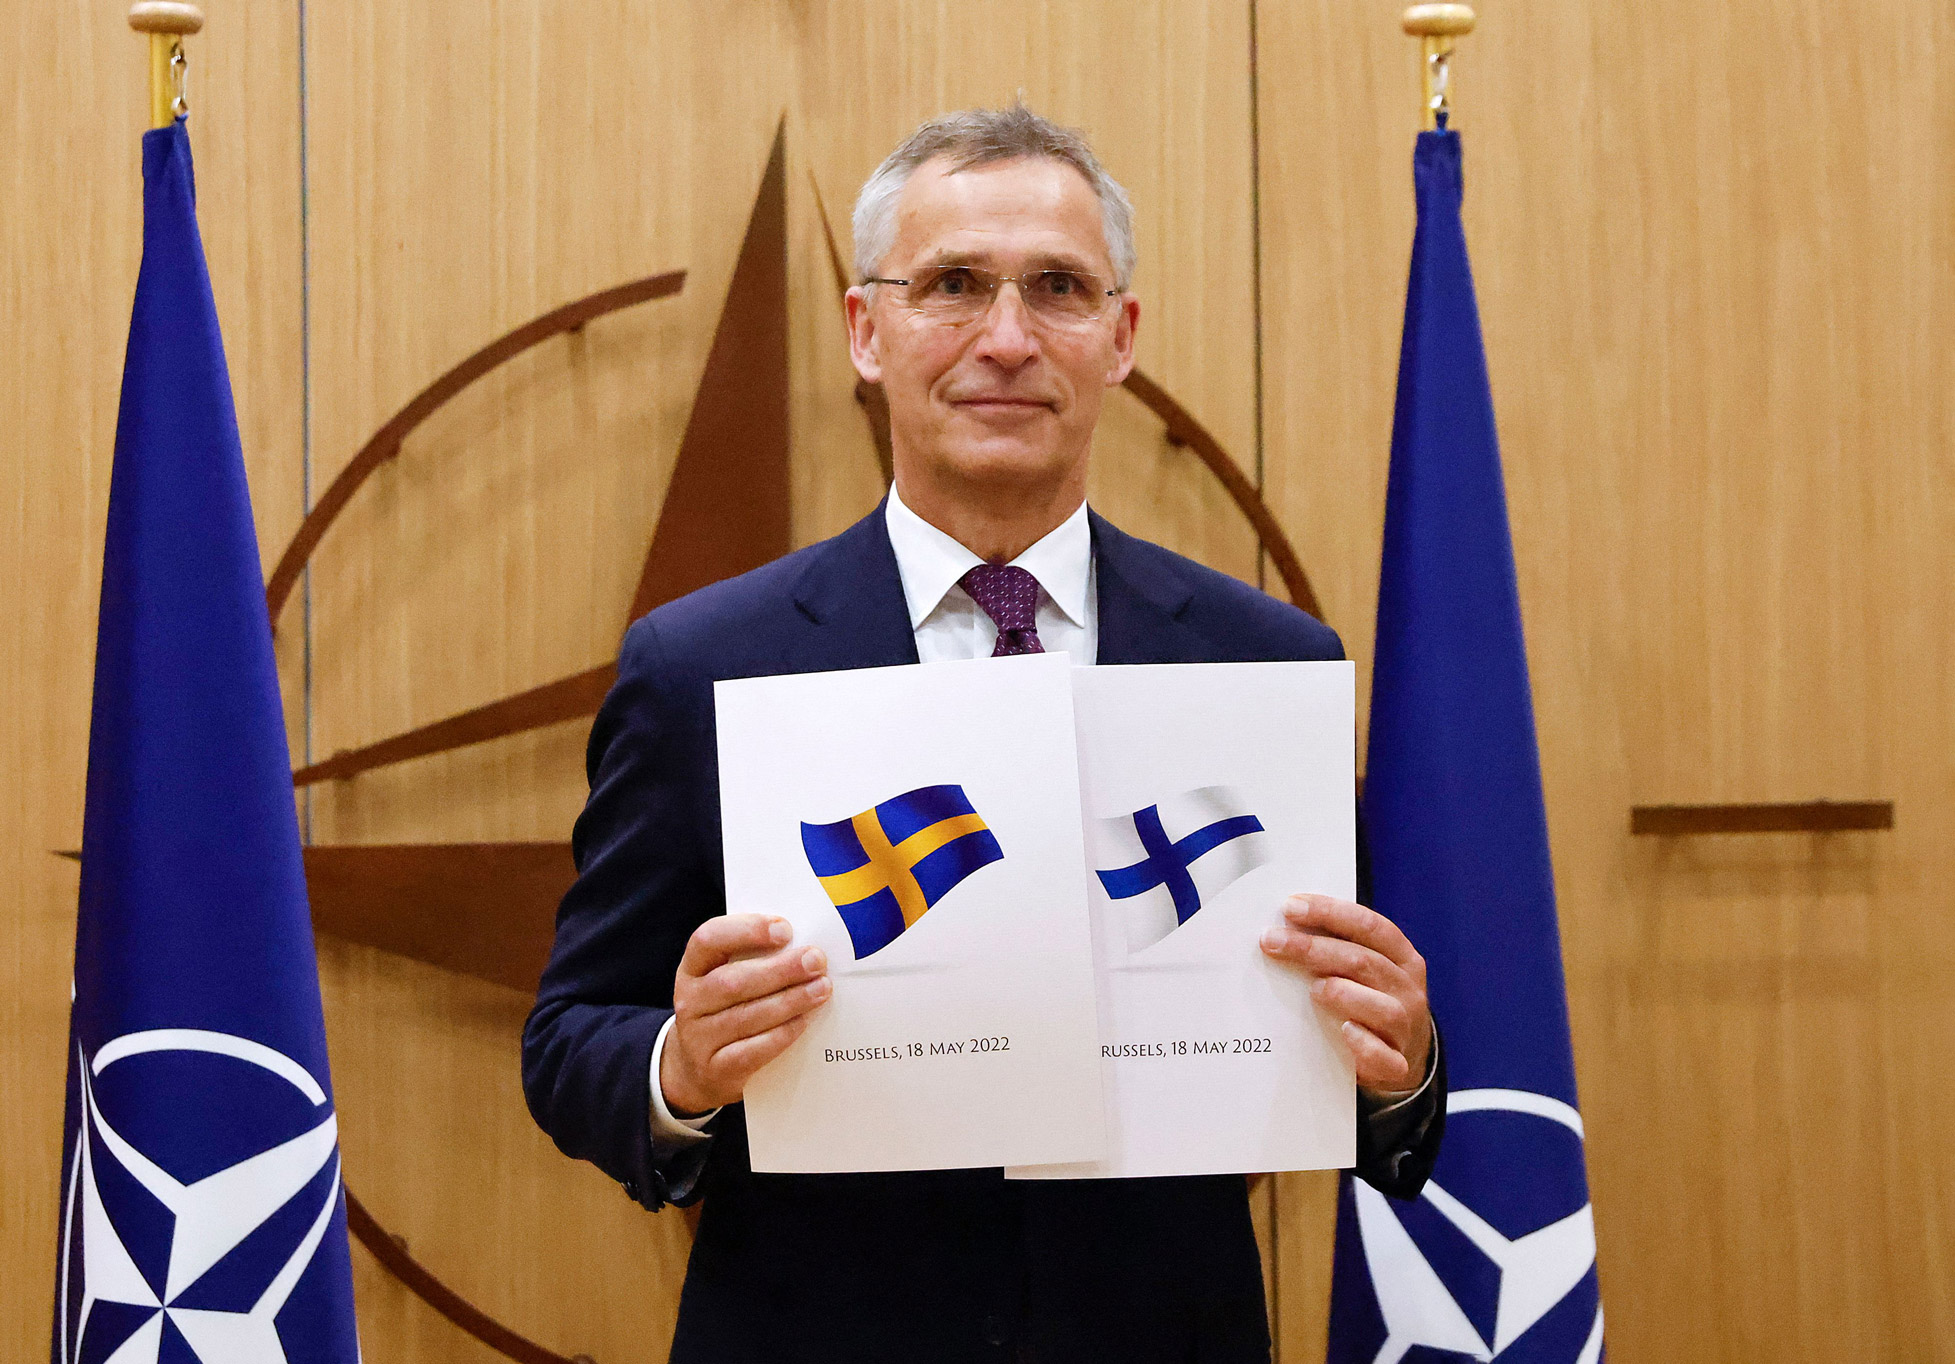 NATO Secretary-General Jens Stoltenberg poses with application documents presented by Finland and Sweden's Ambassadors to NATO during a ceremony in Brussels, on May 18.